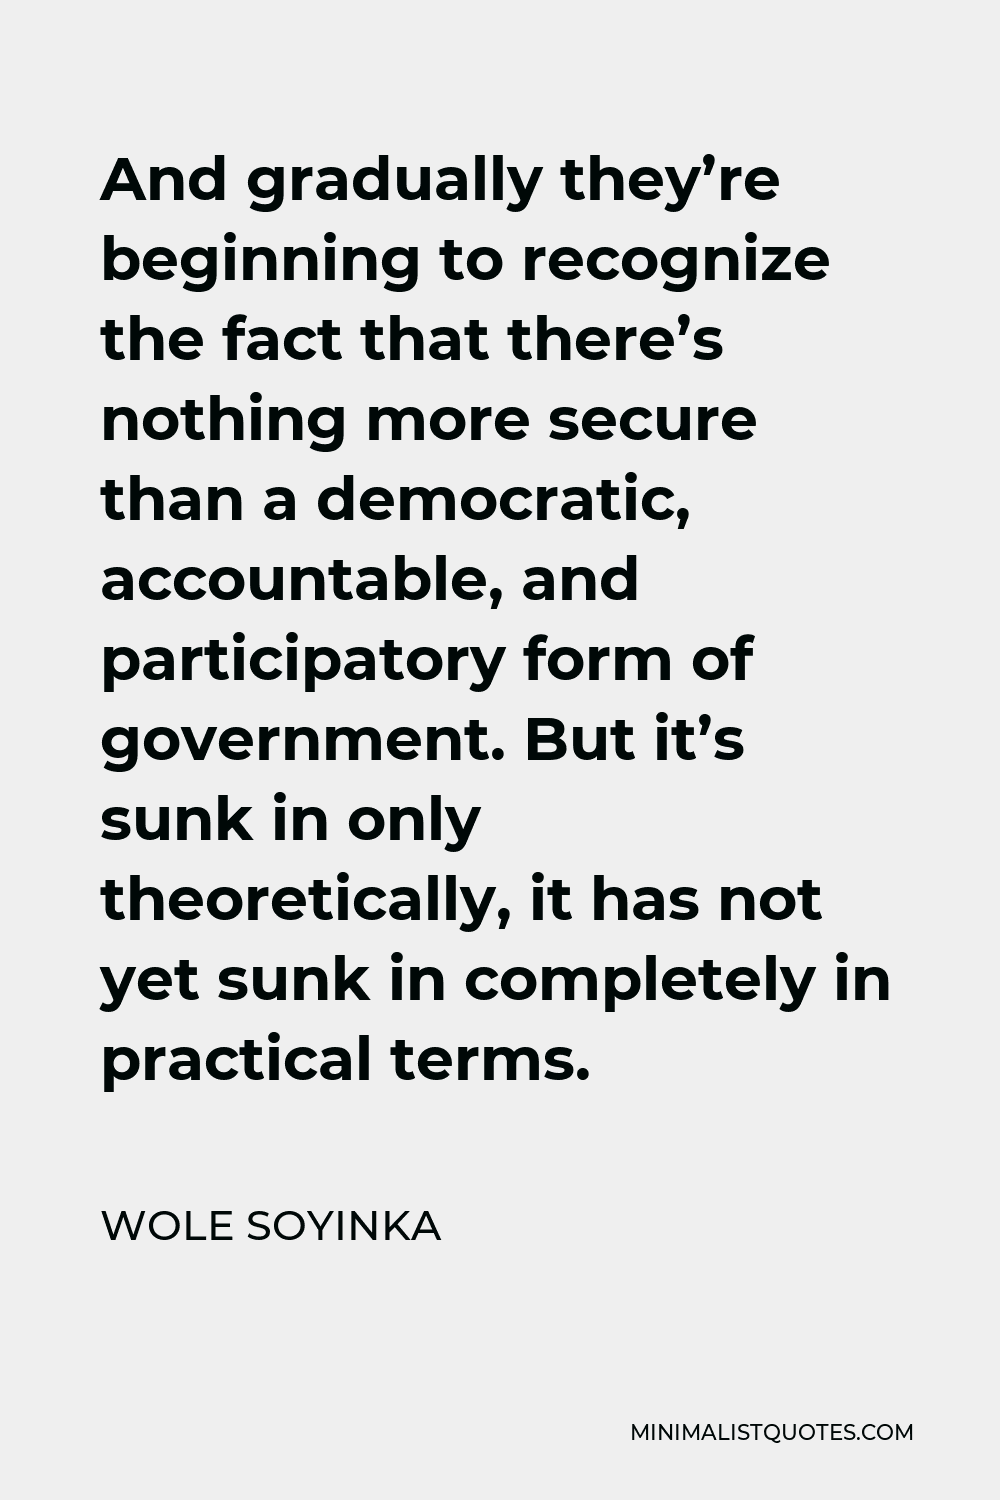 Wole Soyinka Quote - And gradually they’re beginning to recognize the fact that there’s nothing more secure than a democratic, accountable, and participatory form of government. But it’s sunk in only theoretically, it has not yet sunk in completely in practical terms.